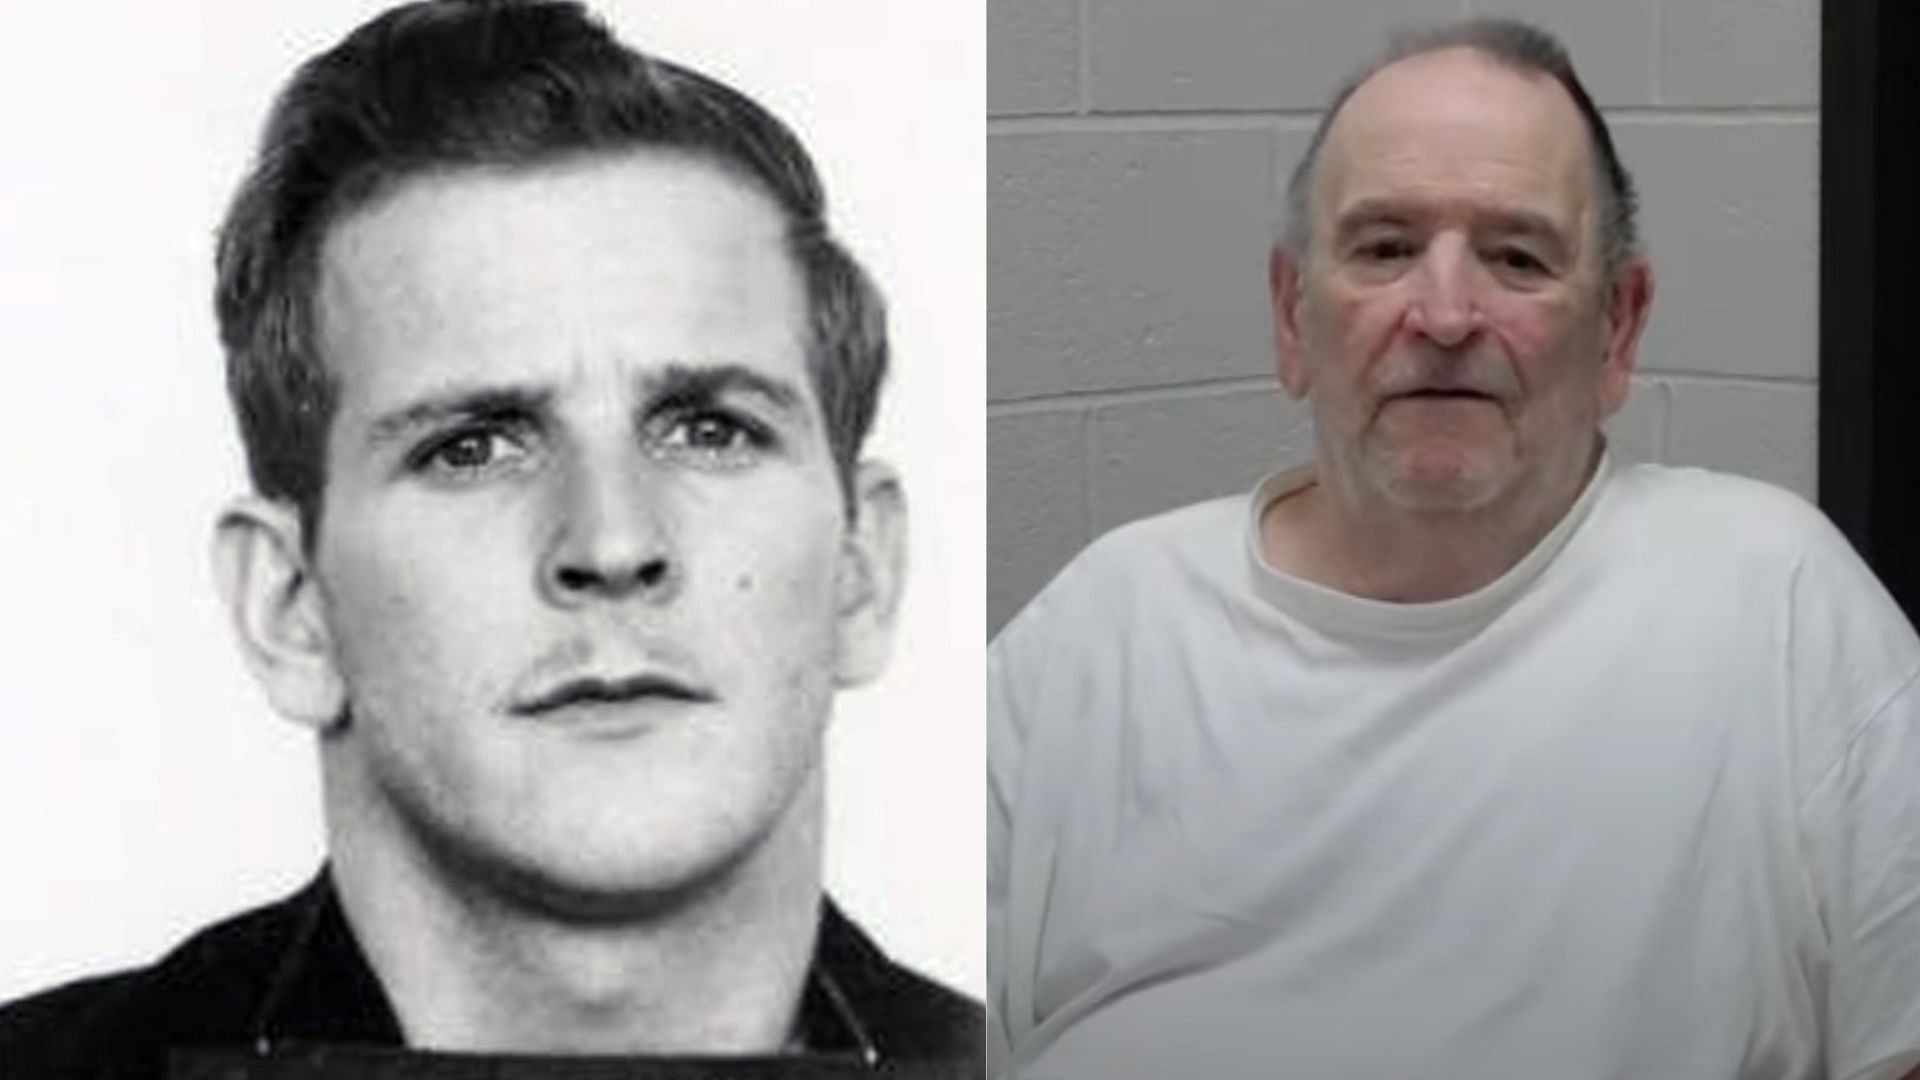 Serial killer Edward Wayne Edwards was arrested in 2009 and died two years later, while on death row (Image via IMDb, Geauga County Maple Leaf/YouTube)